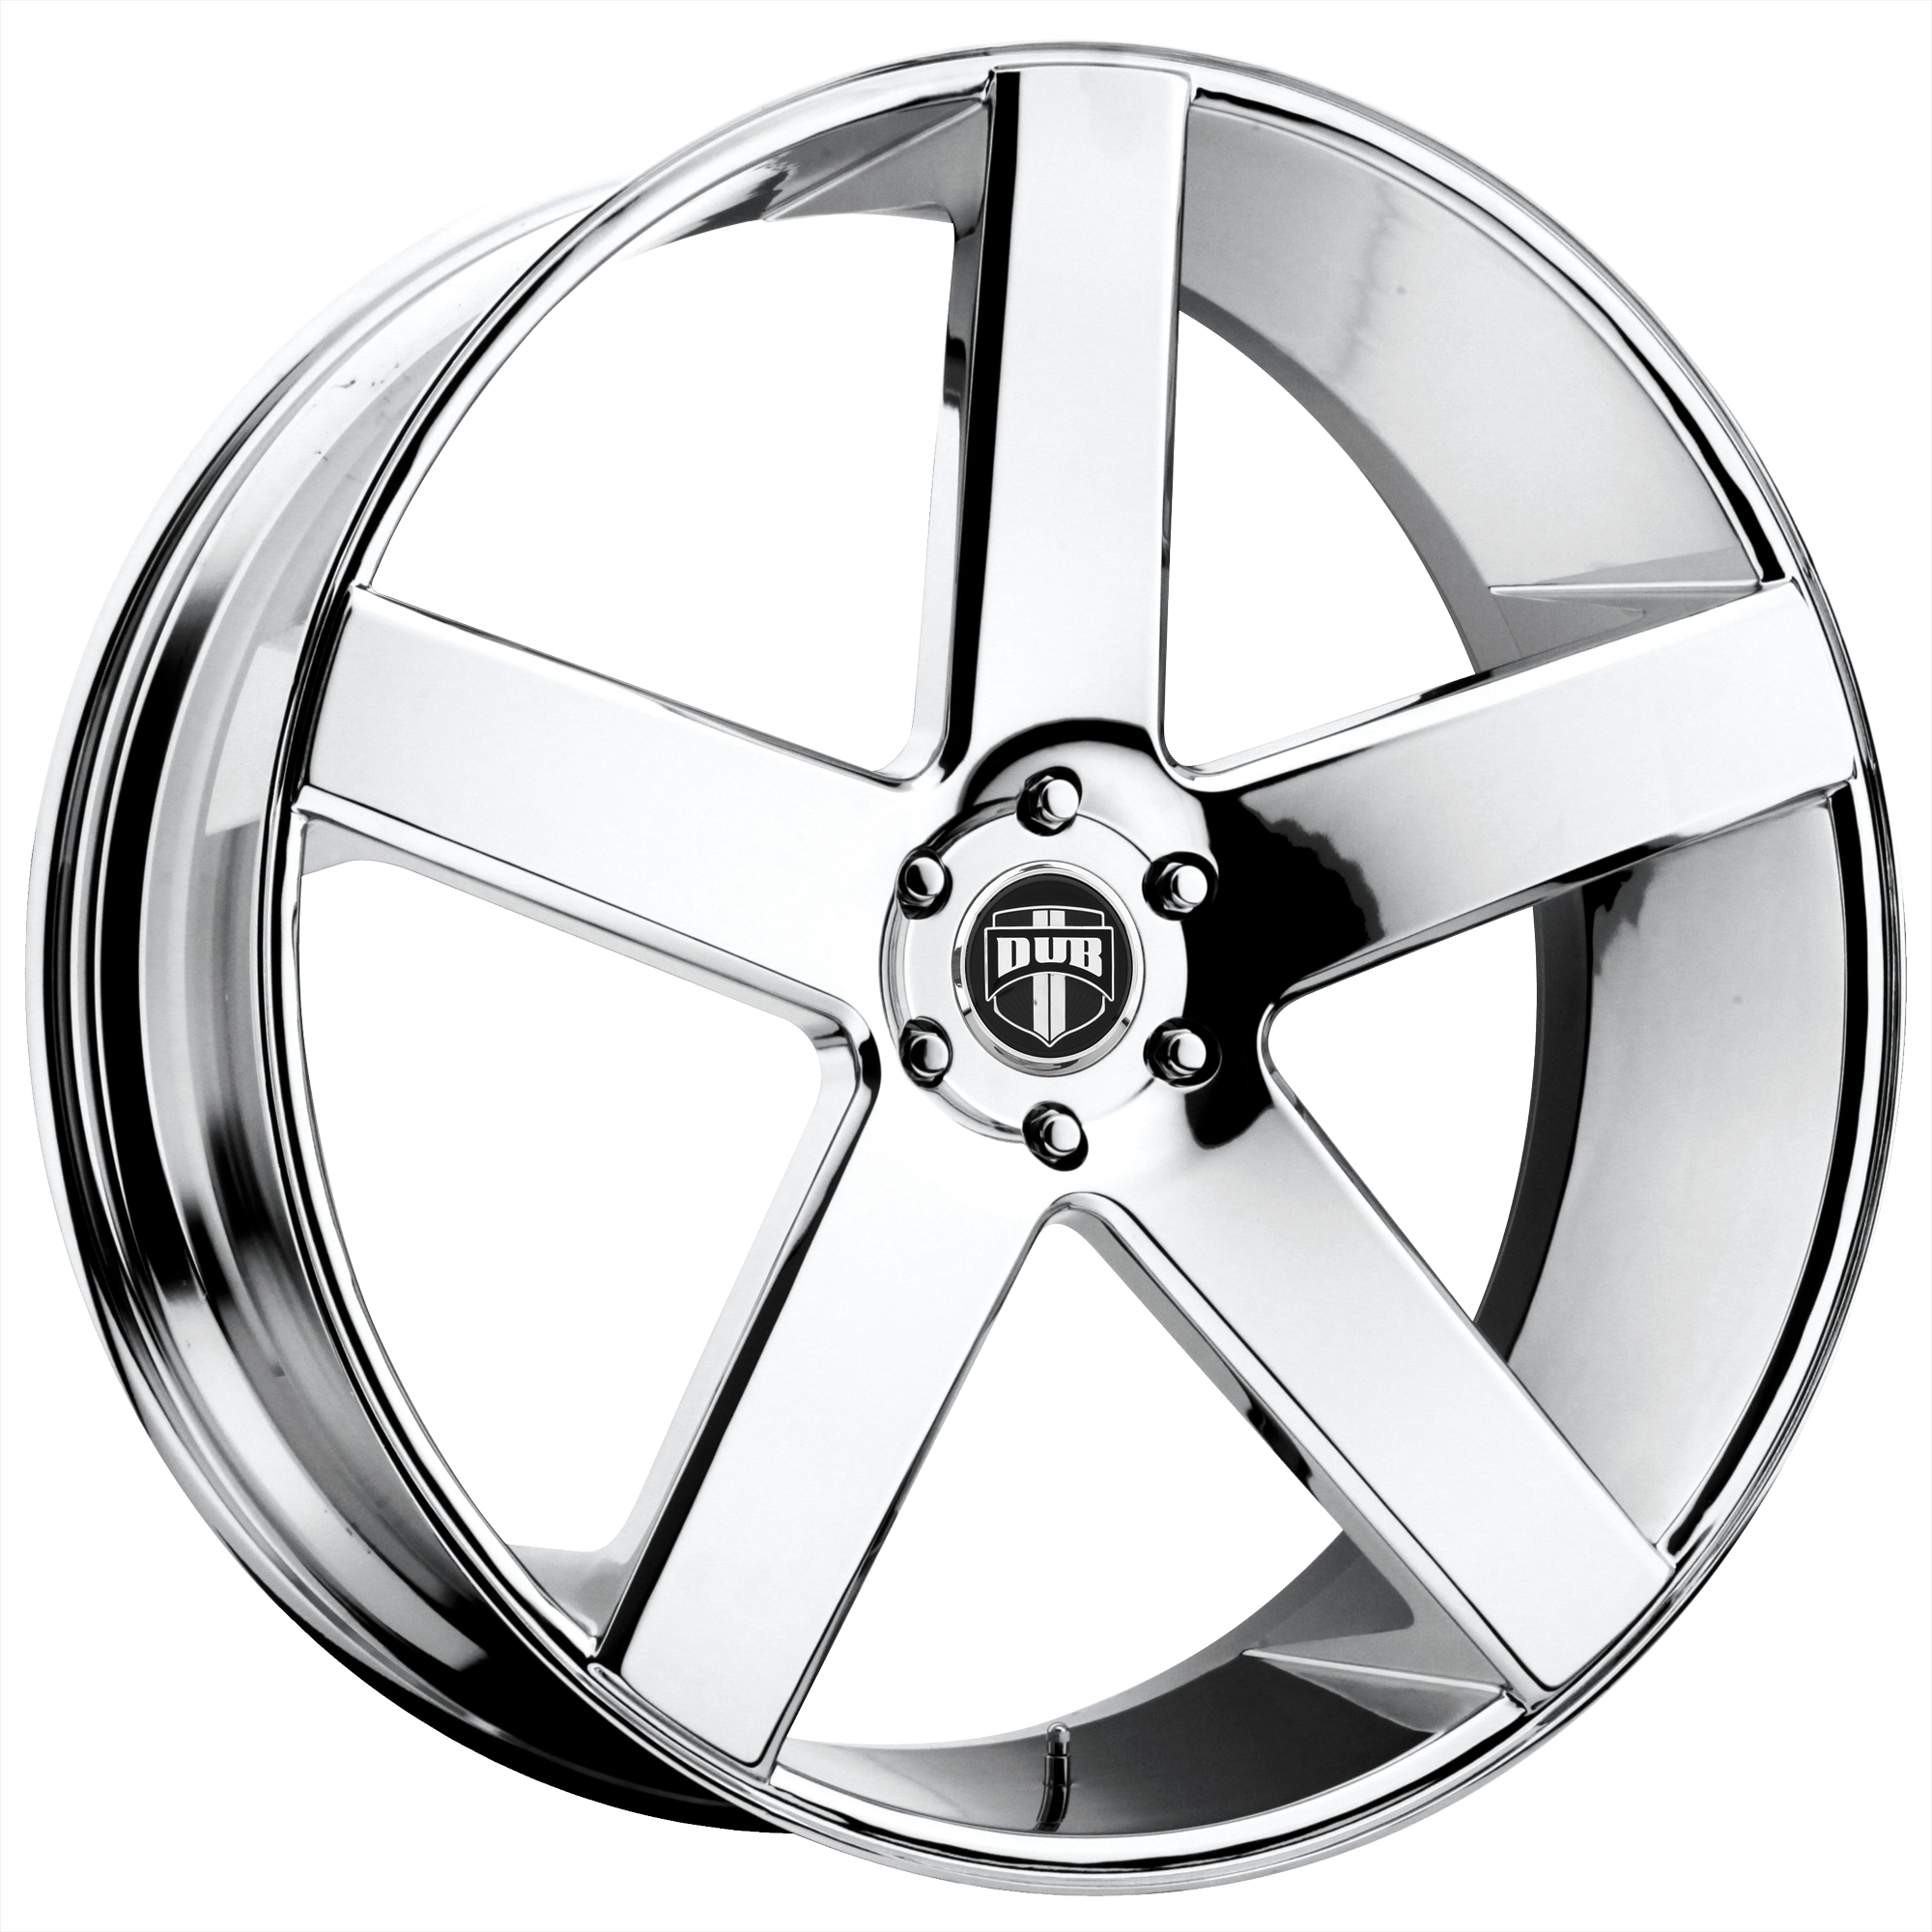 BALLER 22x9 5x115.00 CHROME PLATED (15 mm) - Tires and Engine Performance